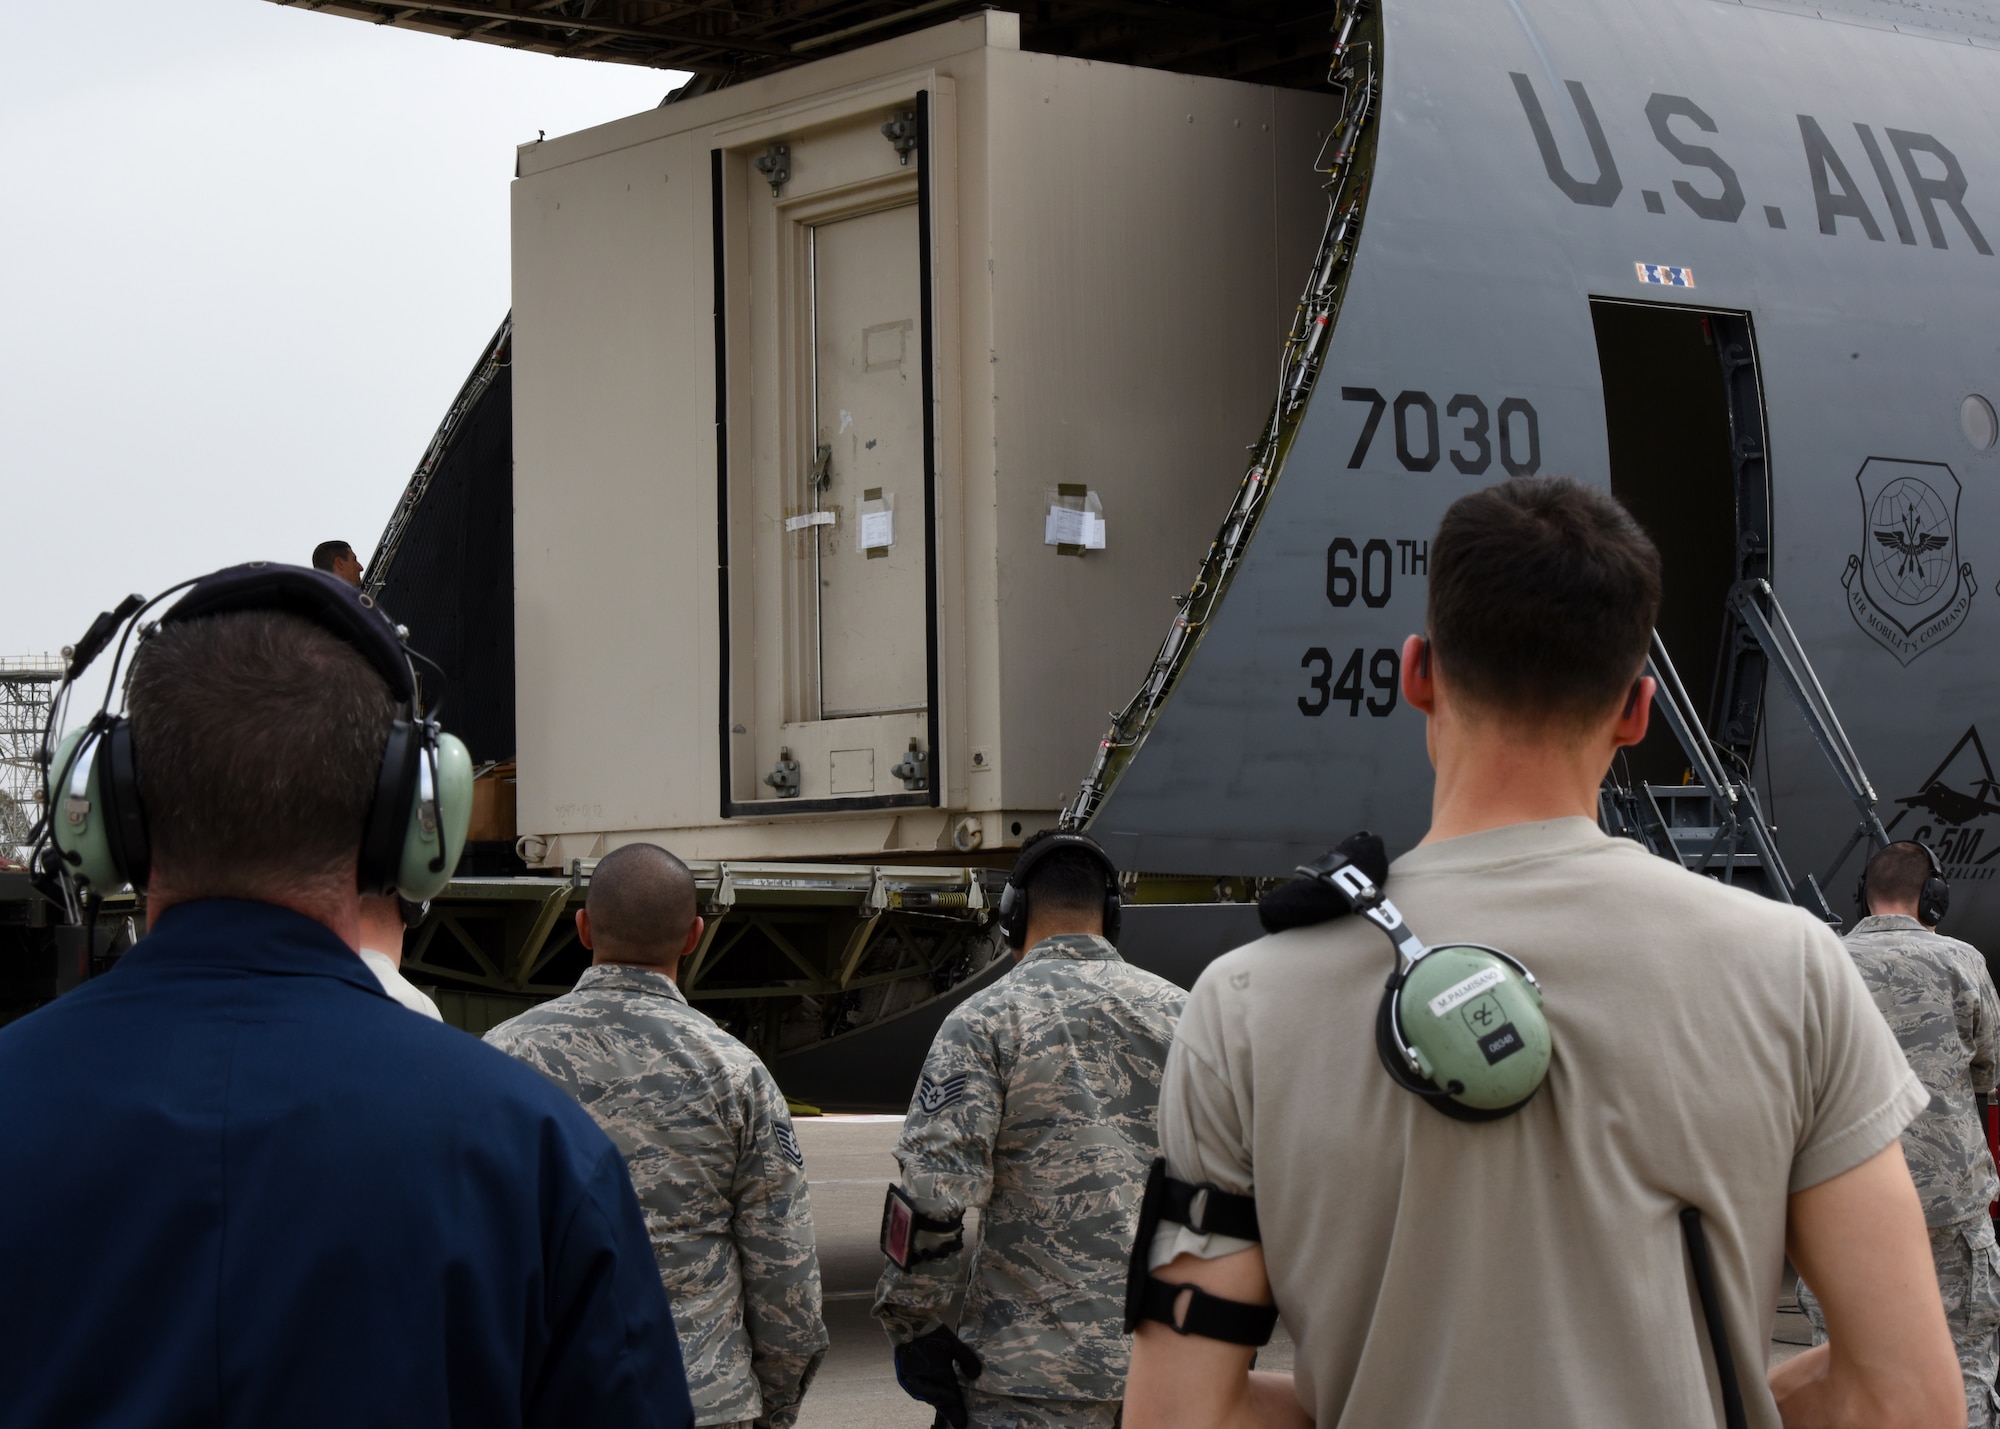 This 78,000 pound deployable shelter was one of three temporary armories transported with assistance from the 728th Air Mobility Squadron. (U.S. Air Force photo by Staff Sgt. Rebeccah Woodrow)